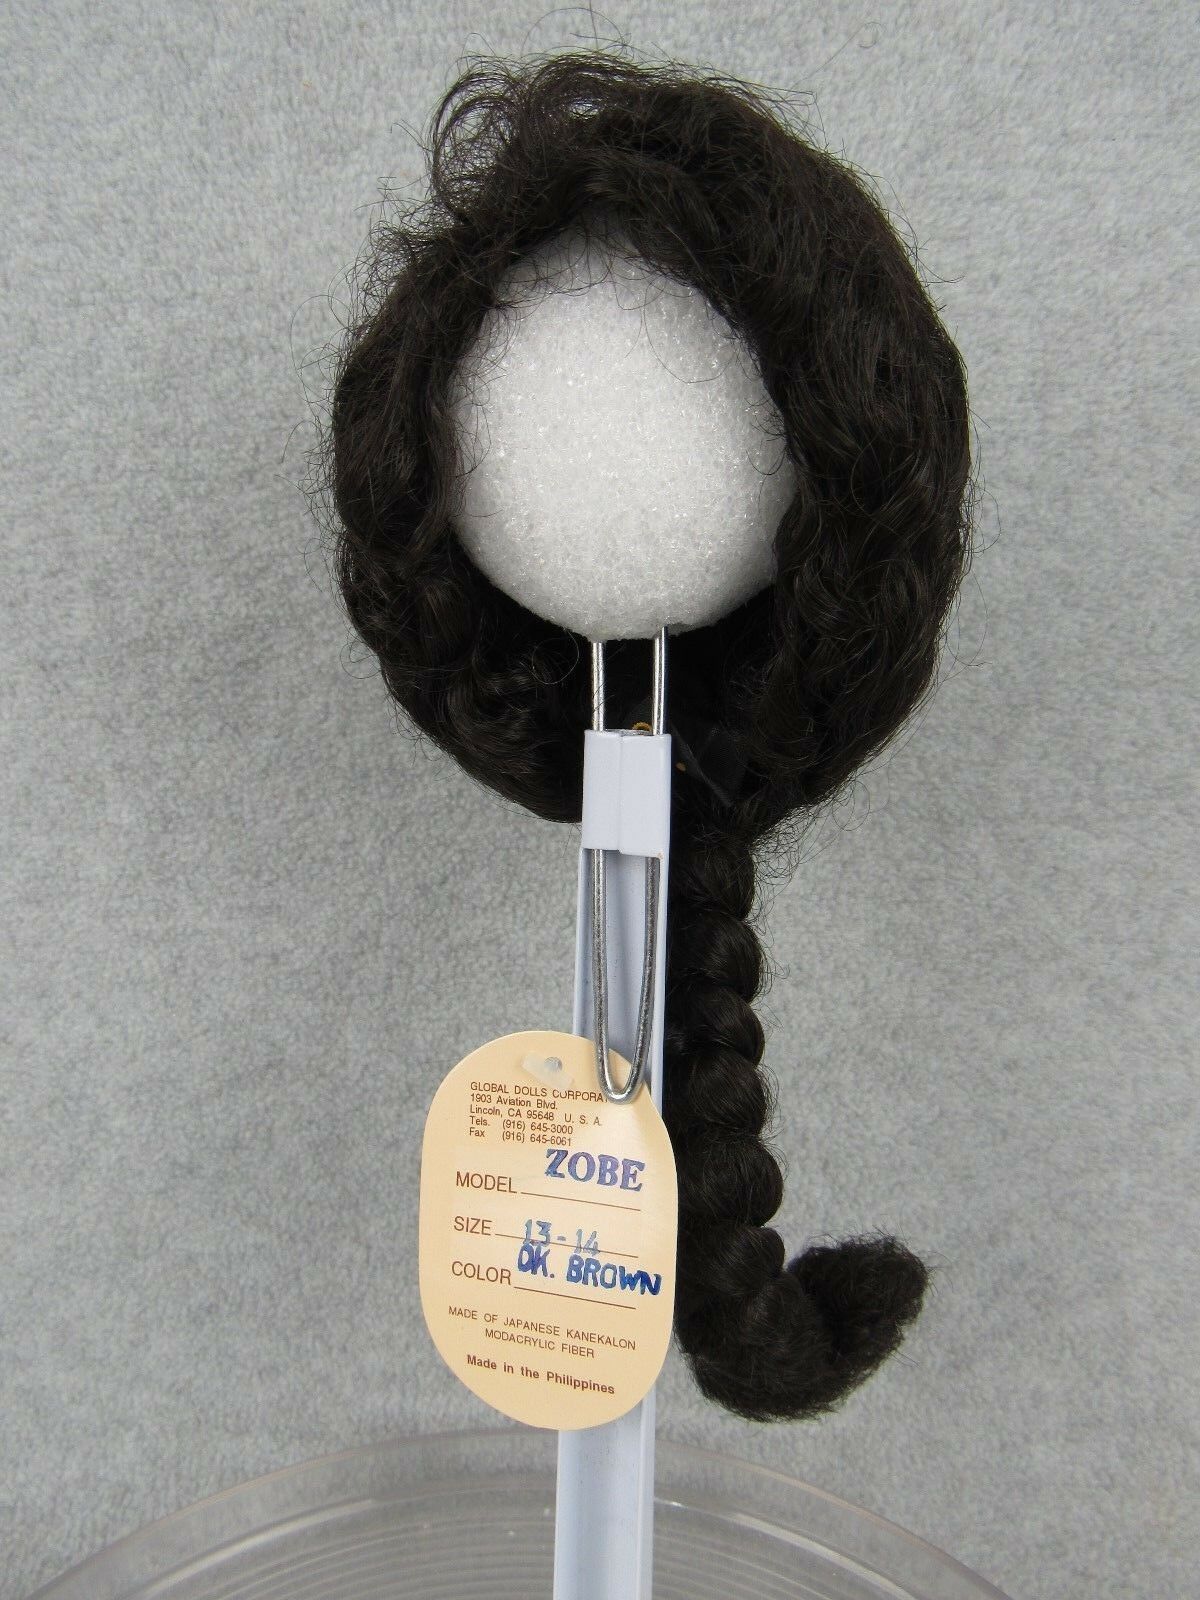 Global Doll Wig Size 13-14 Zobe Dark Brown With Tag Box & Hairnet